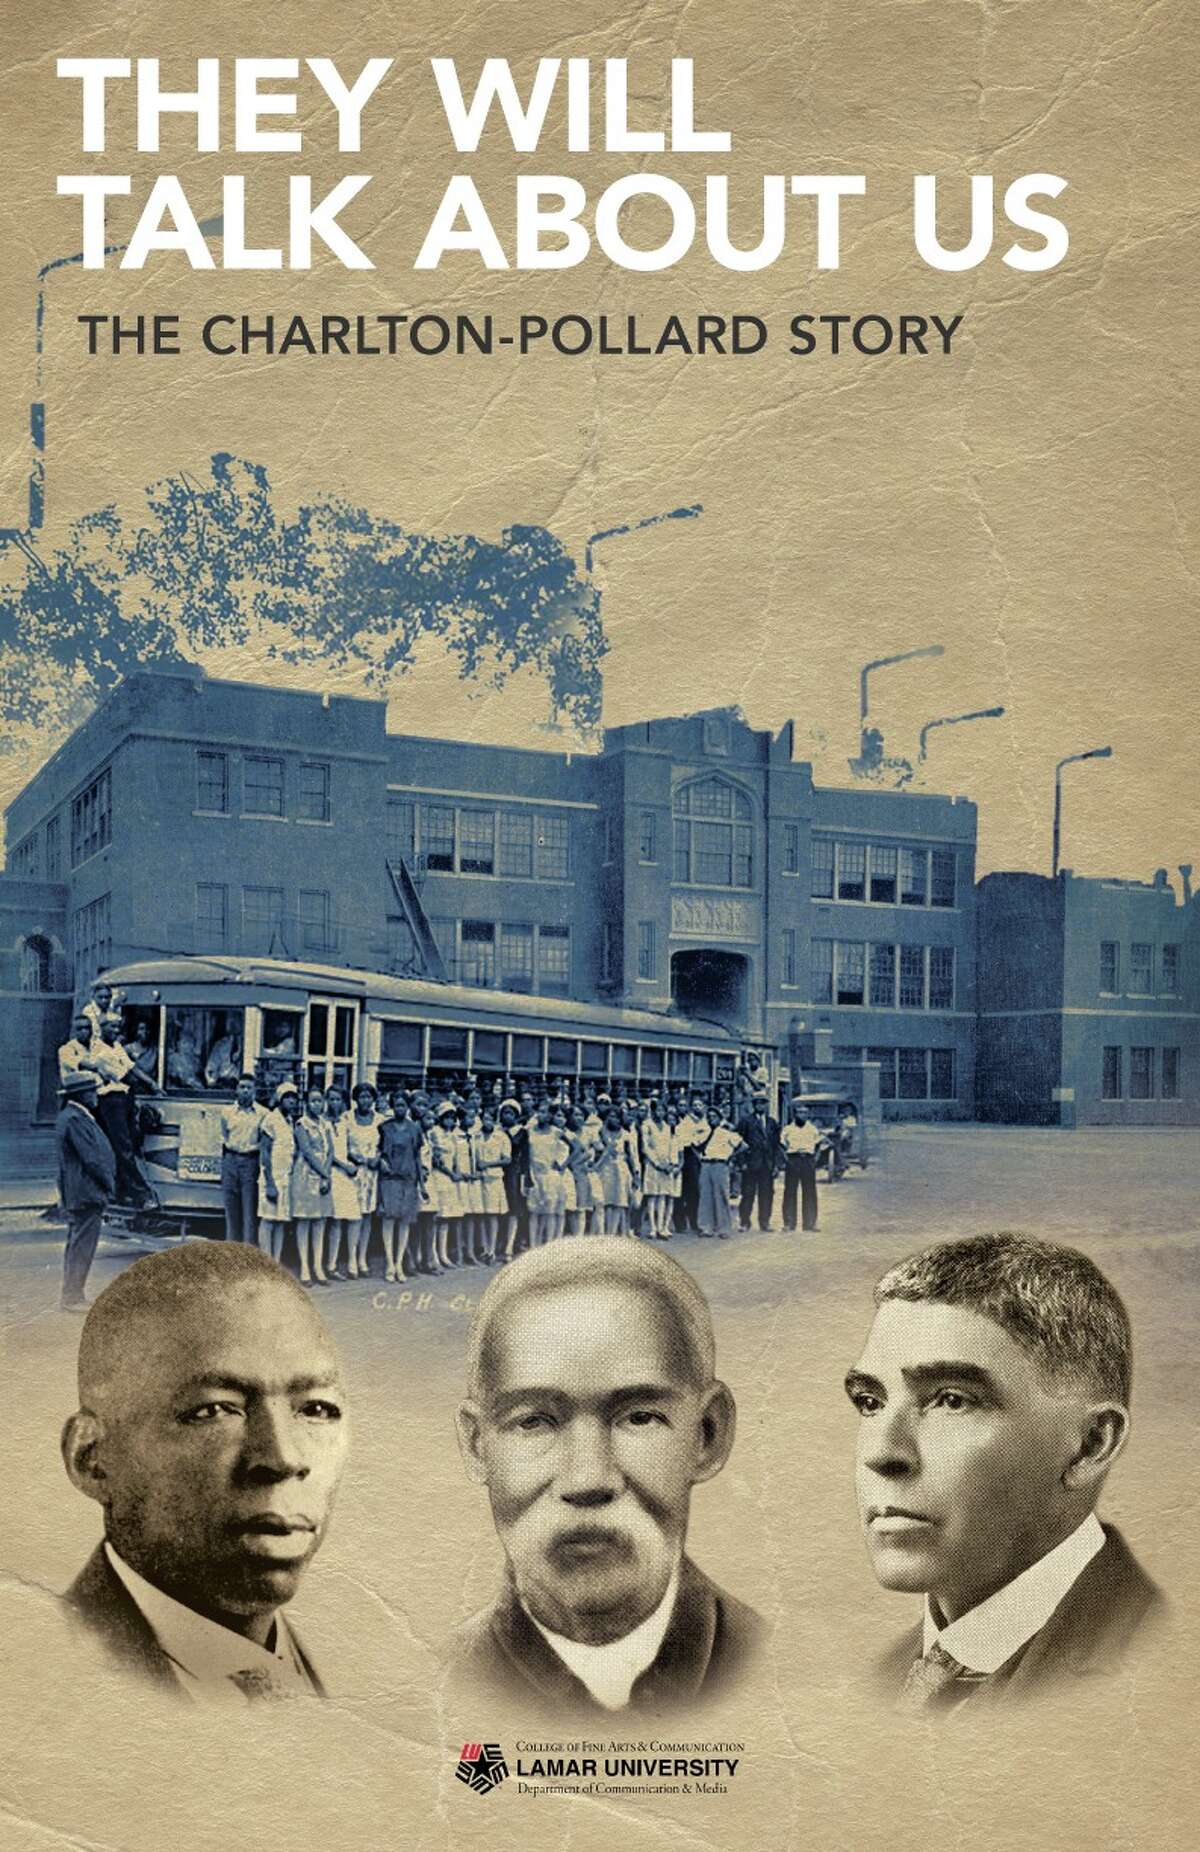 Lamar University Television Productions' documentary, "They Will Talk About Us: The Charlton-Pollard Story."